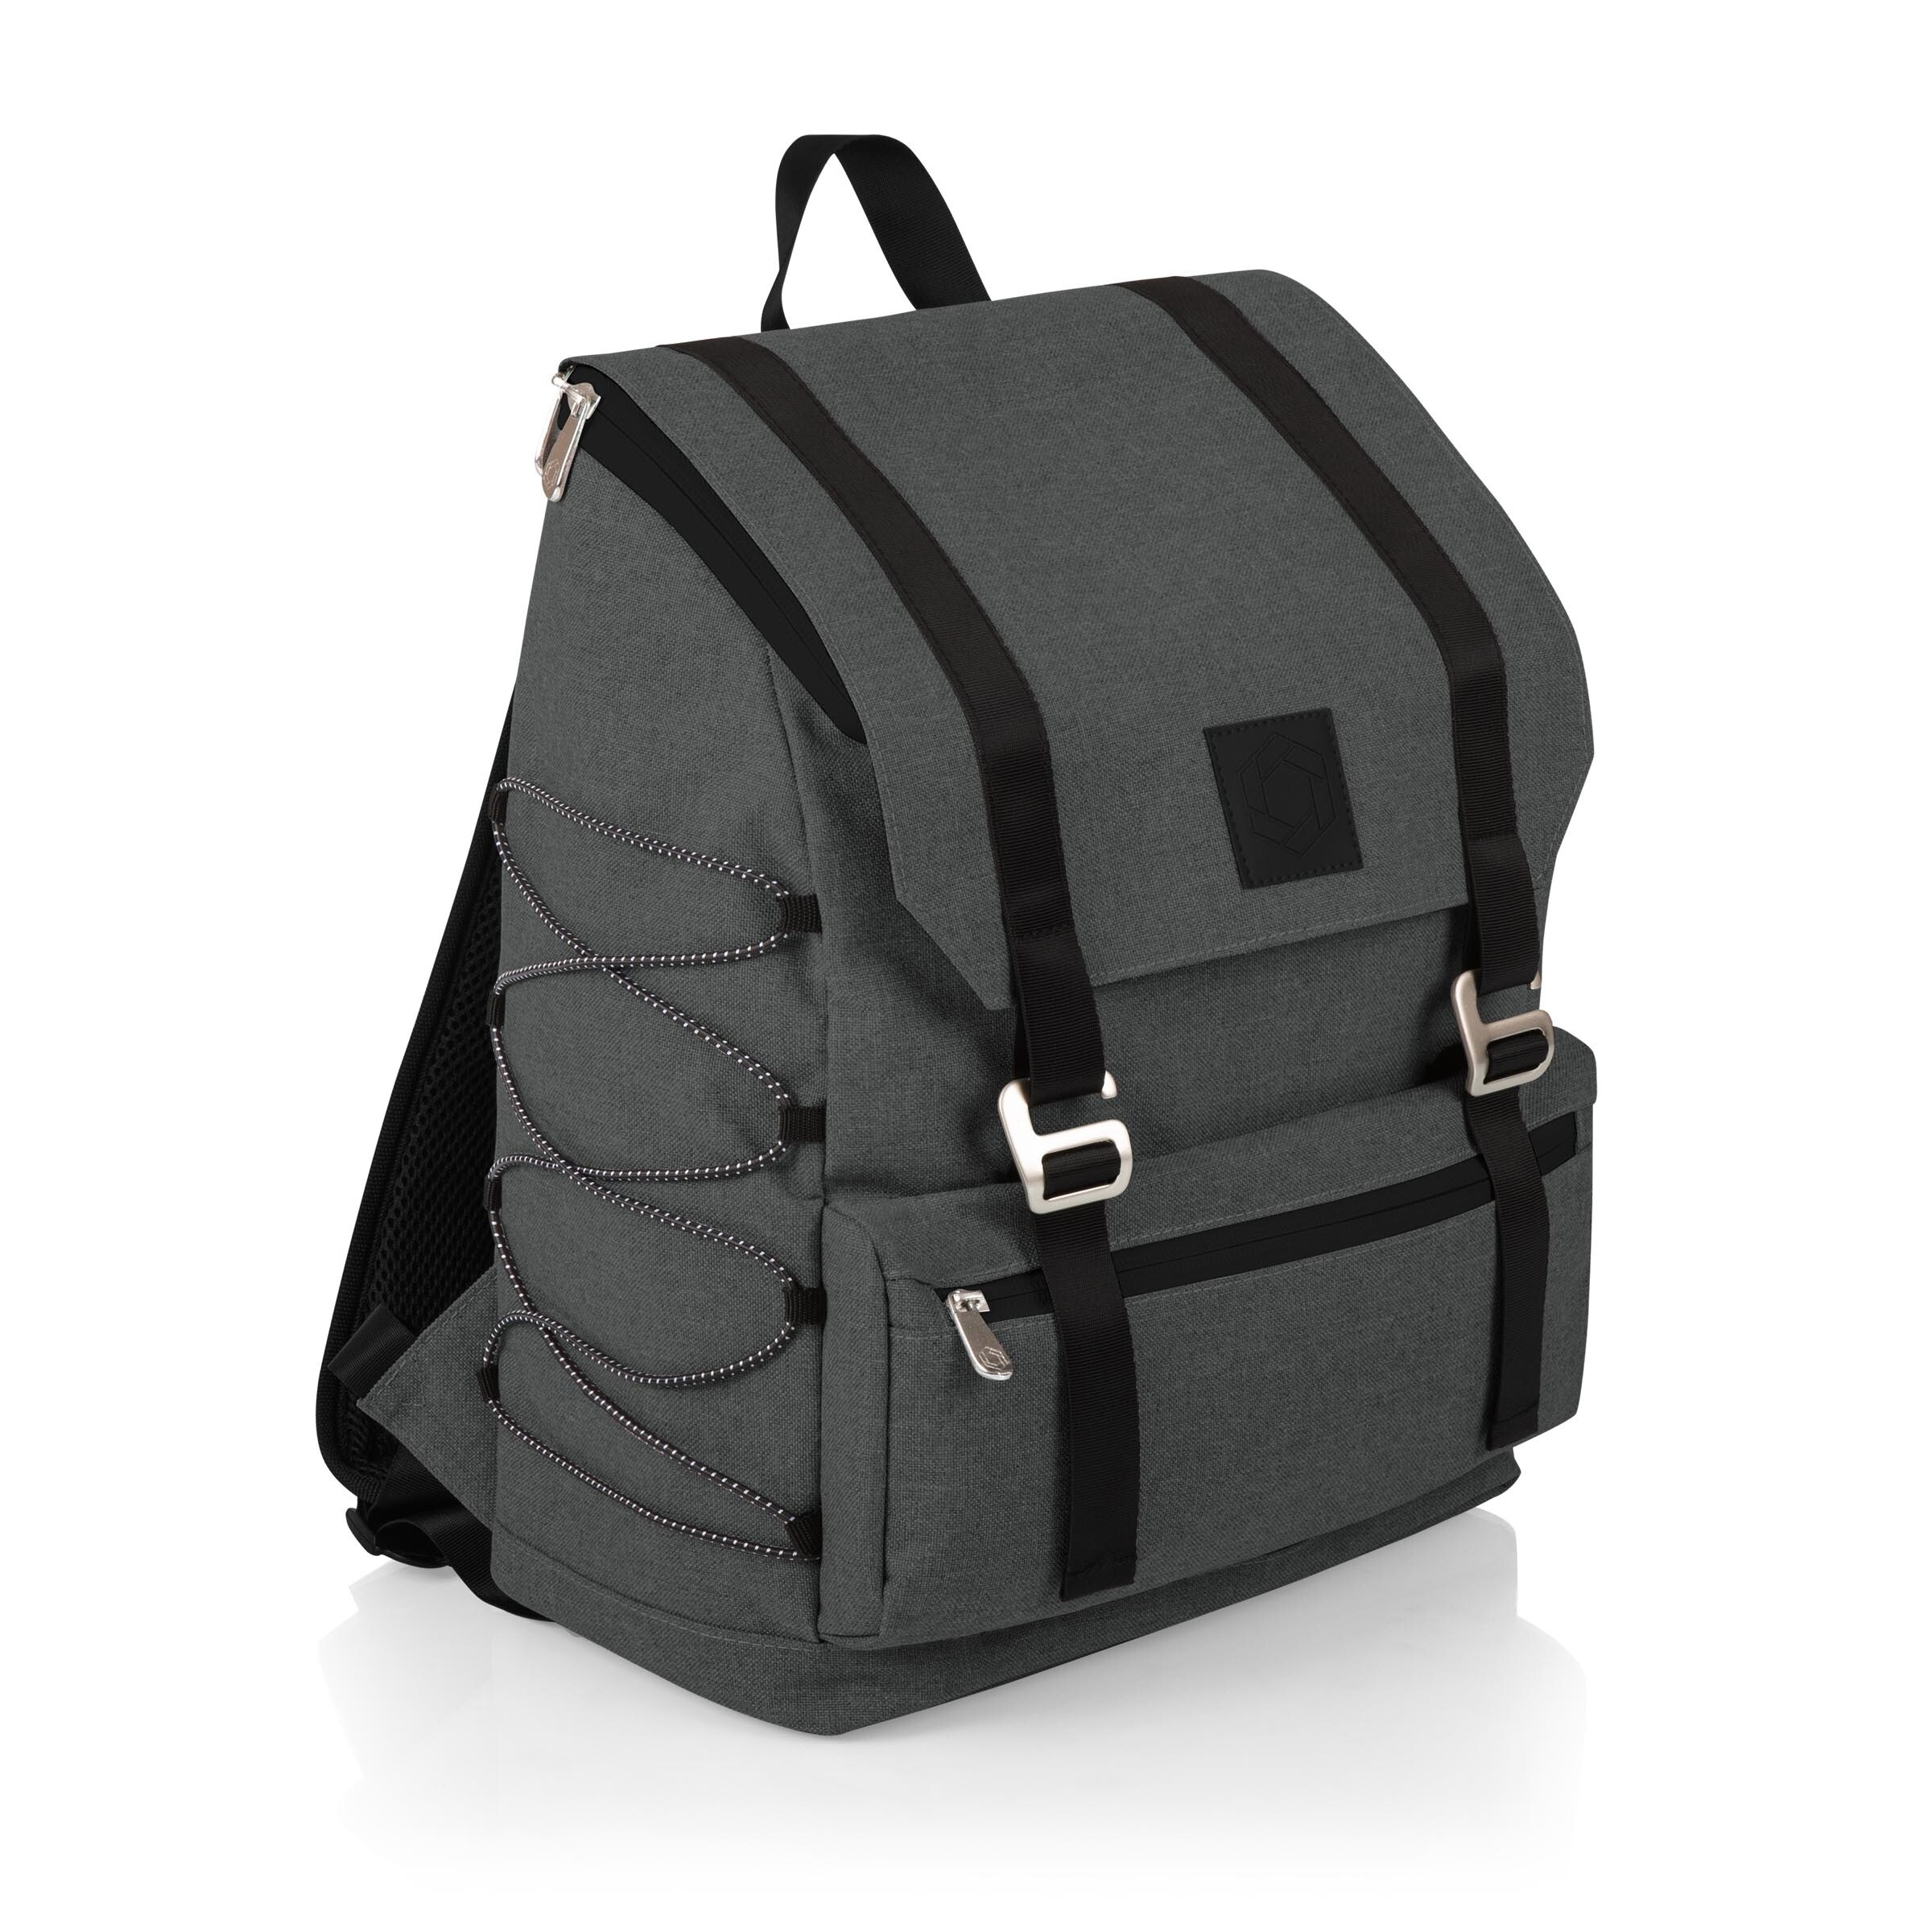 https://ak1.ostkcdn.com/images/products/28228830/On-The-Go-Traverse-Cooler-Backpack-Heathered-Gray-7be0df7d-0198-4af9-b4b5-62f838b3cb4e.jpg